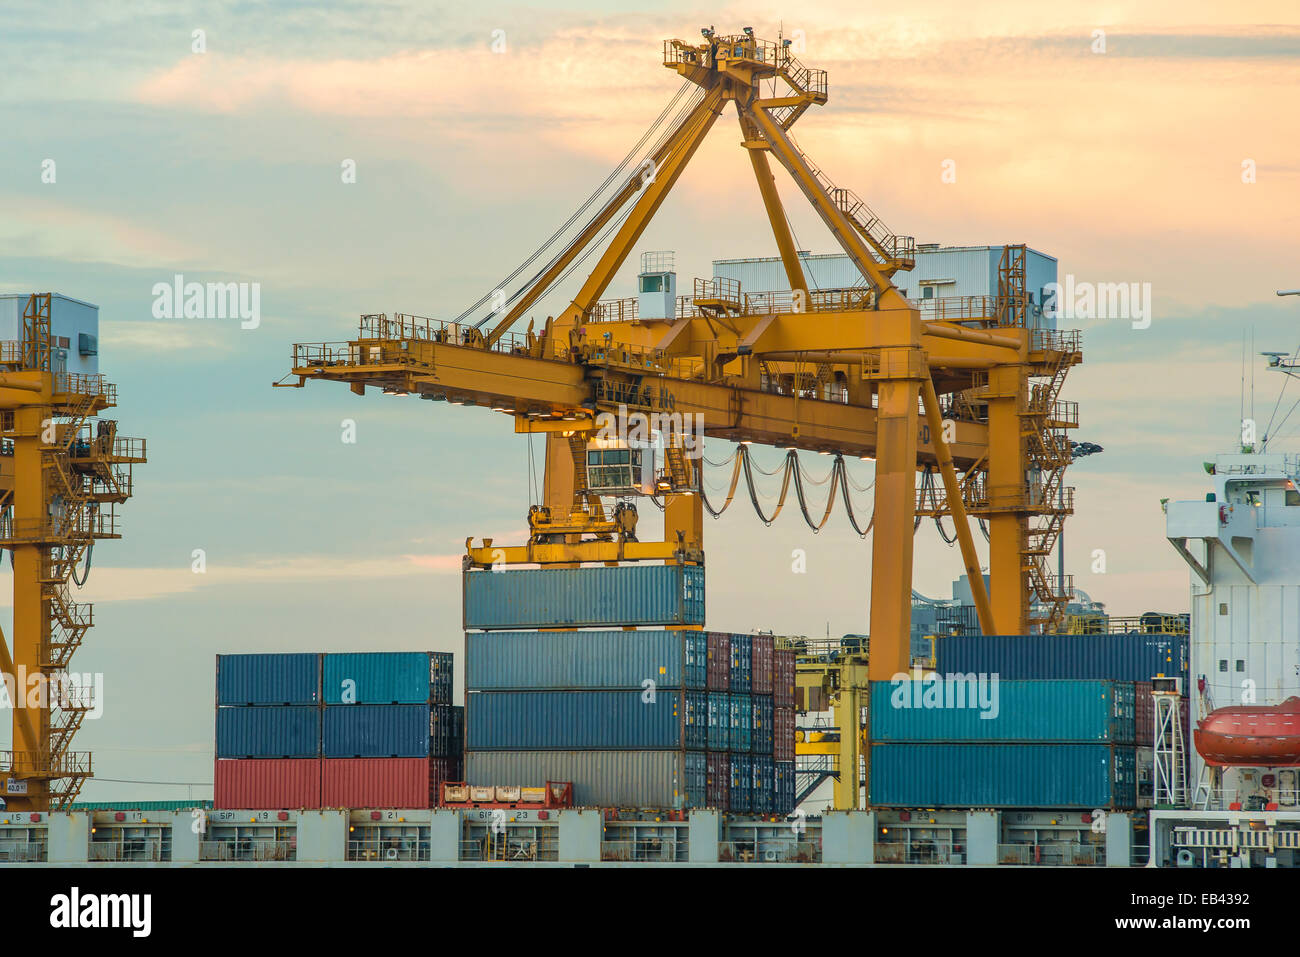 container operation in port series Stock Photo